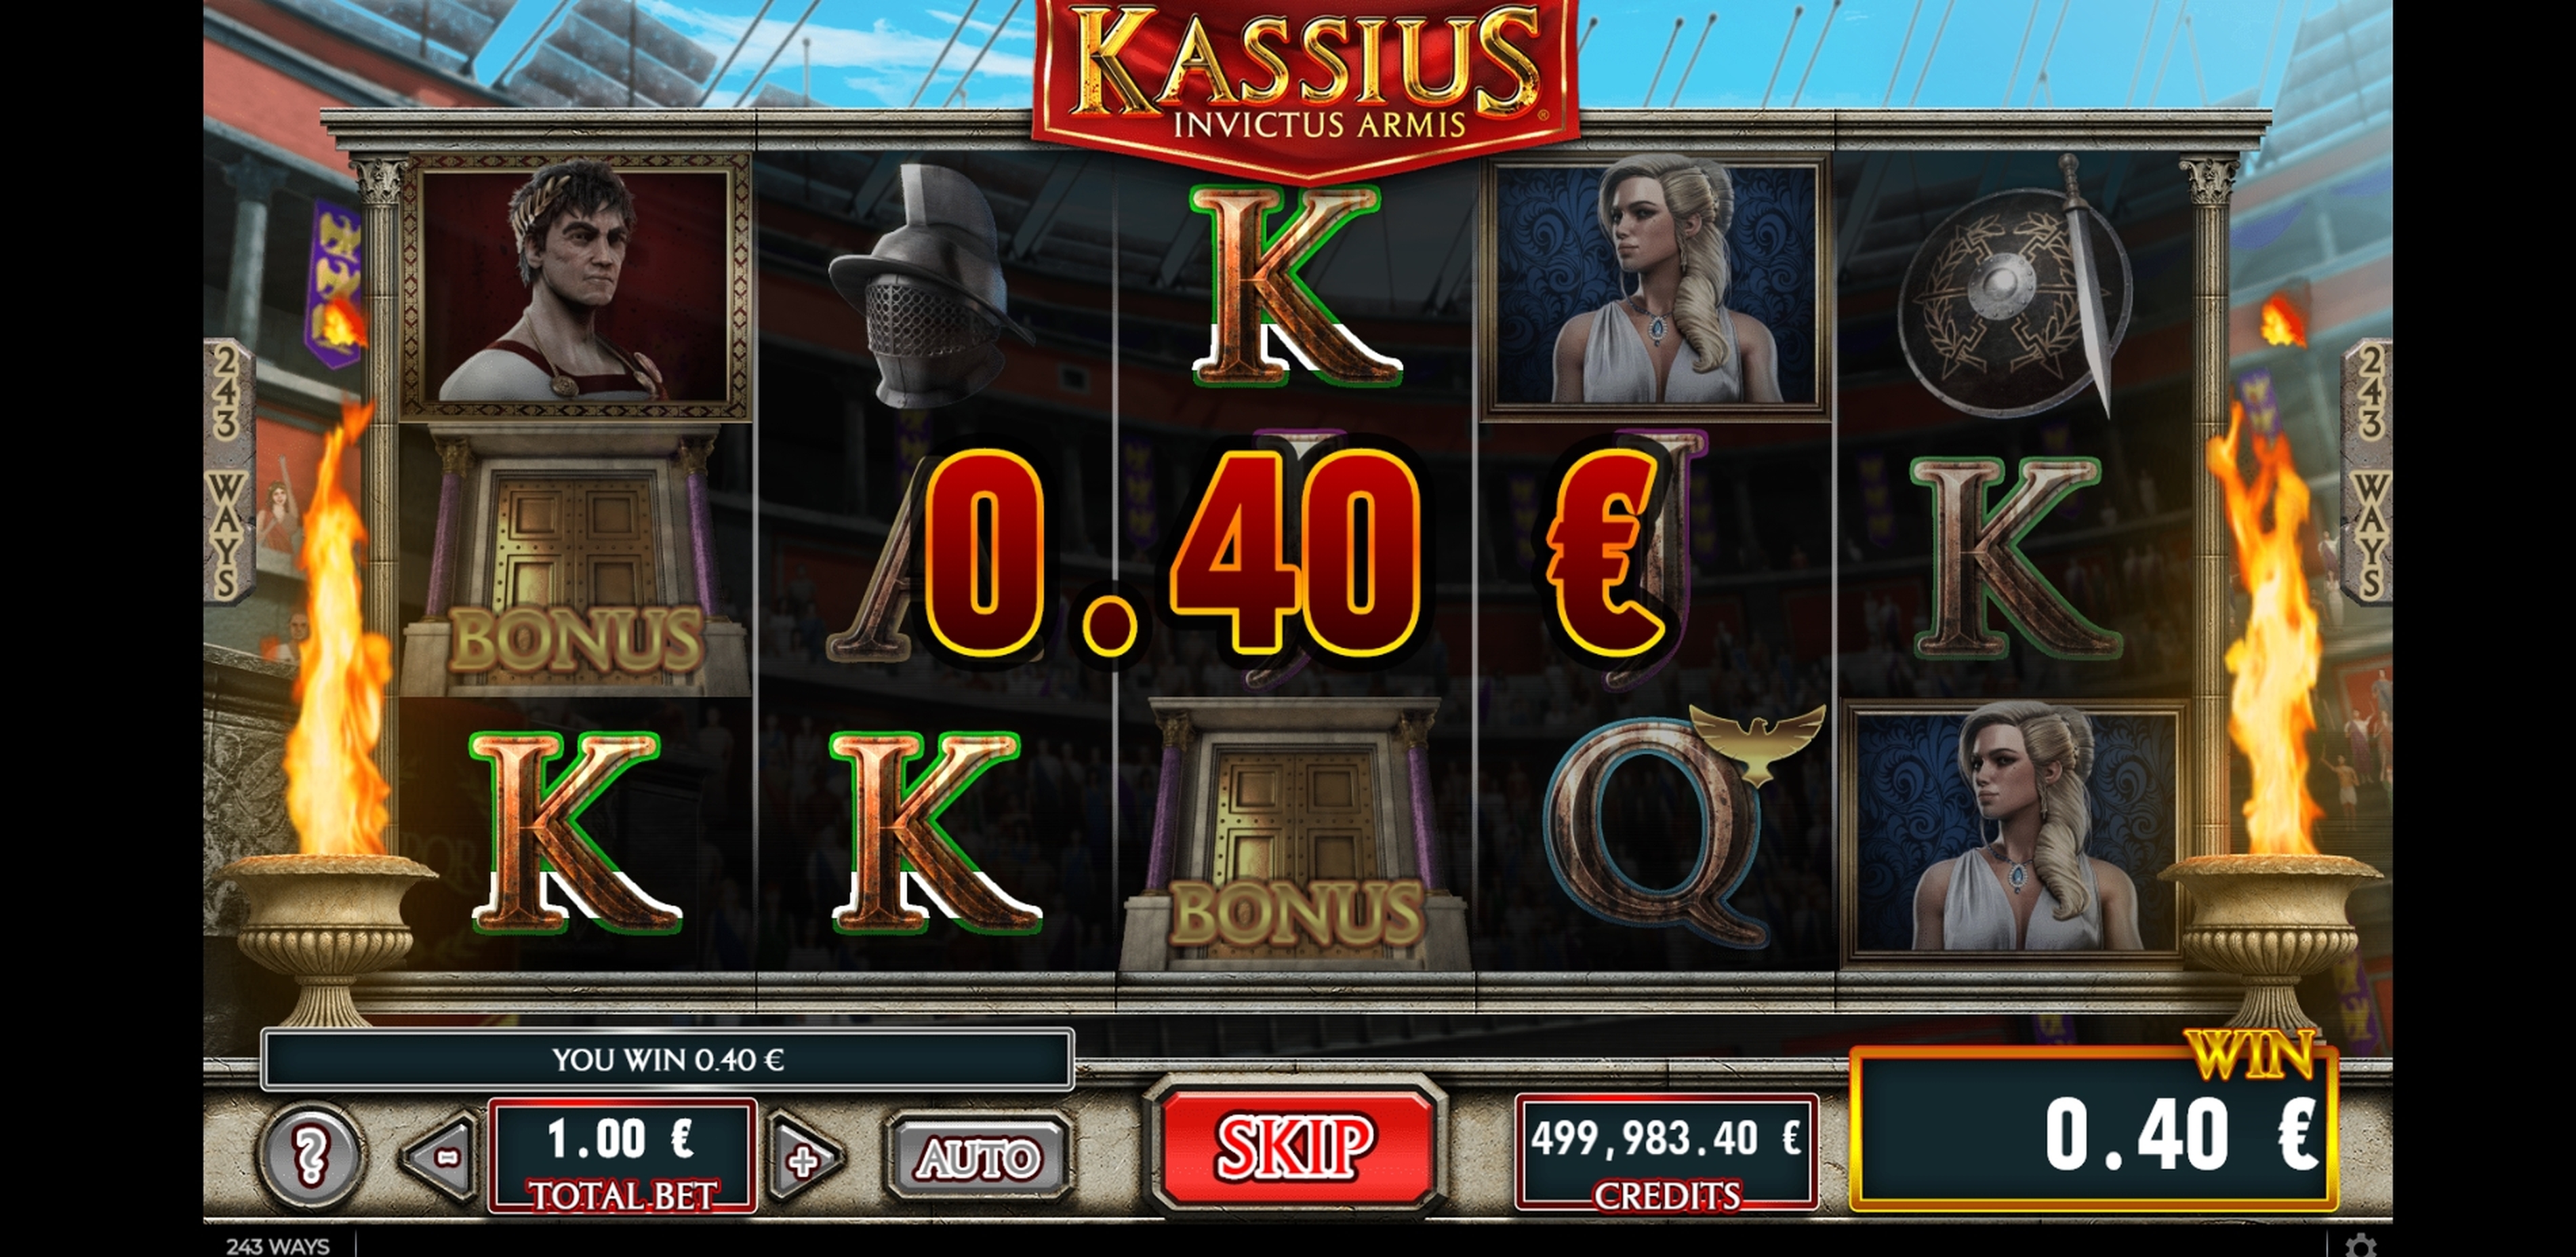 Win Money in Kassius Invictus Armis Free Slot Game by GAMING1